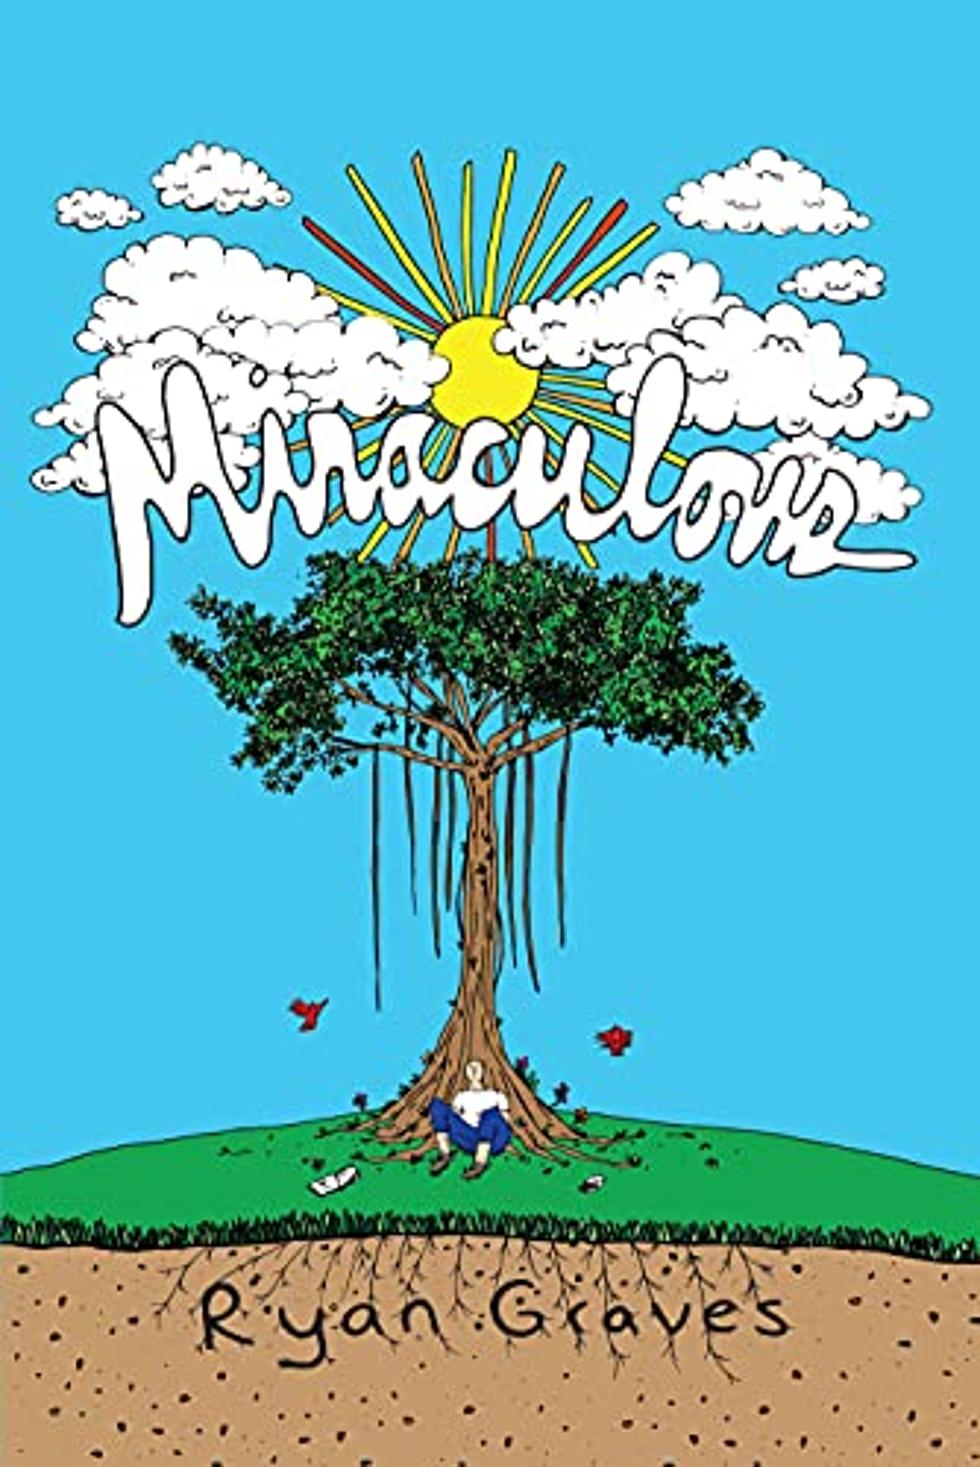 “Miraculous” Written by Man from Presque Isle is a Must Read!